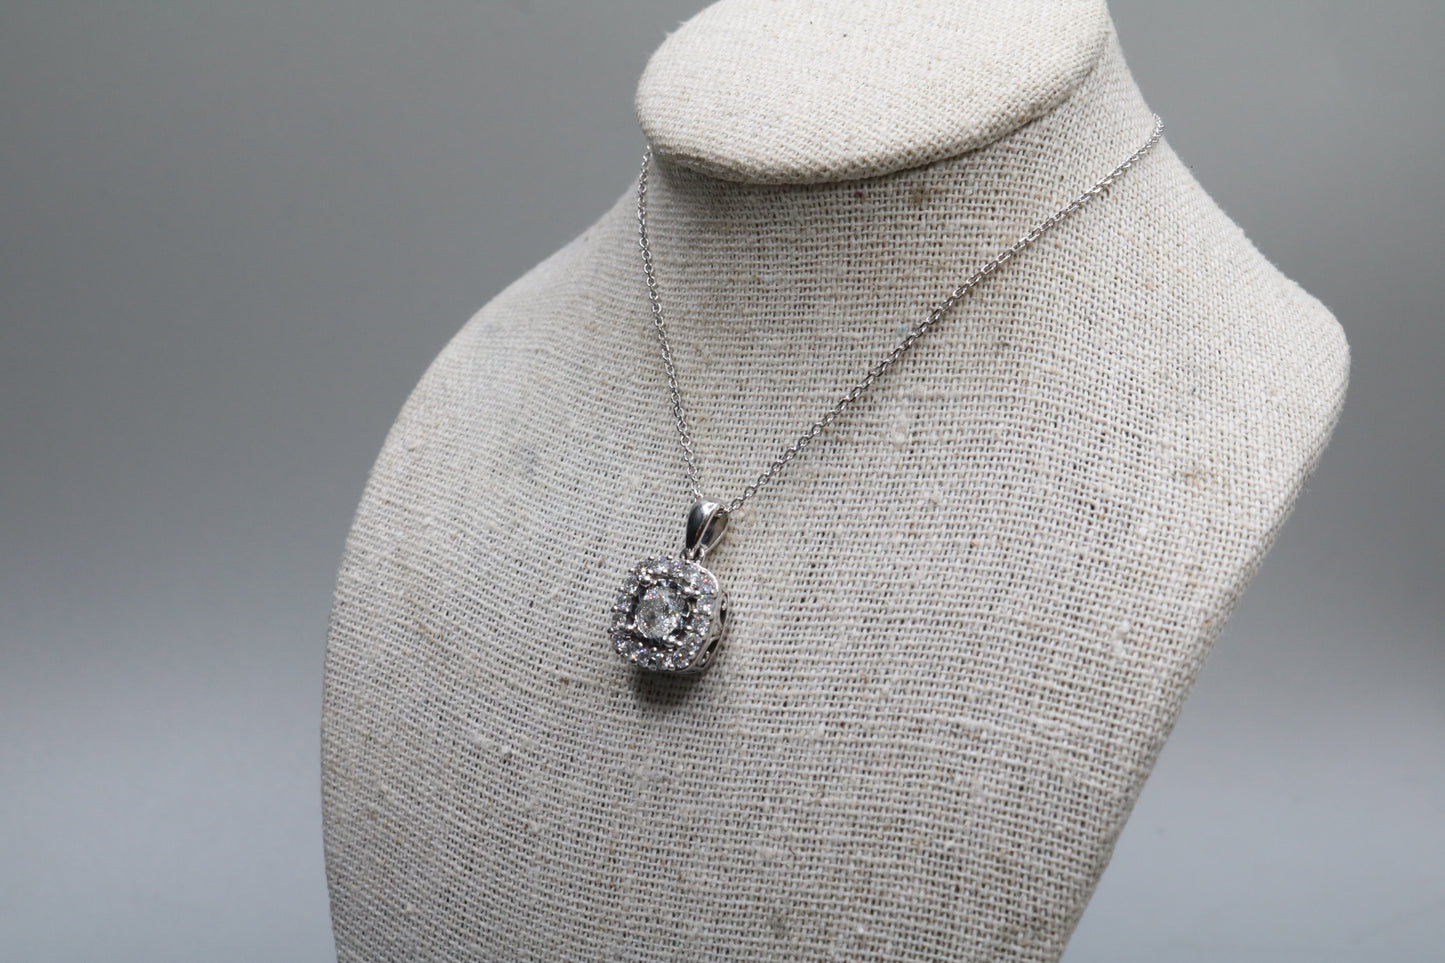 14K White Gold Cable Necklace with a 14K White Gold Diamond Pendant